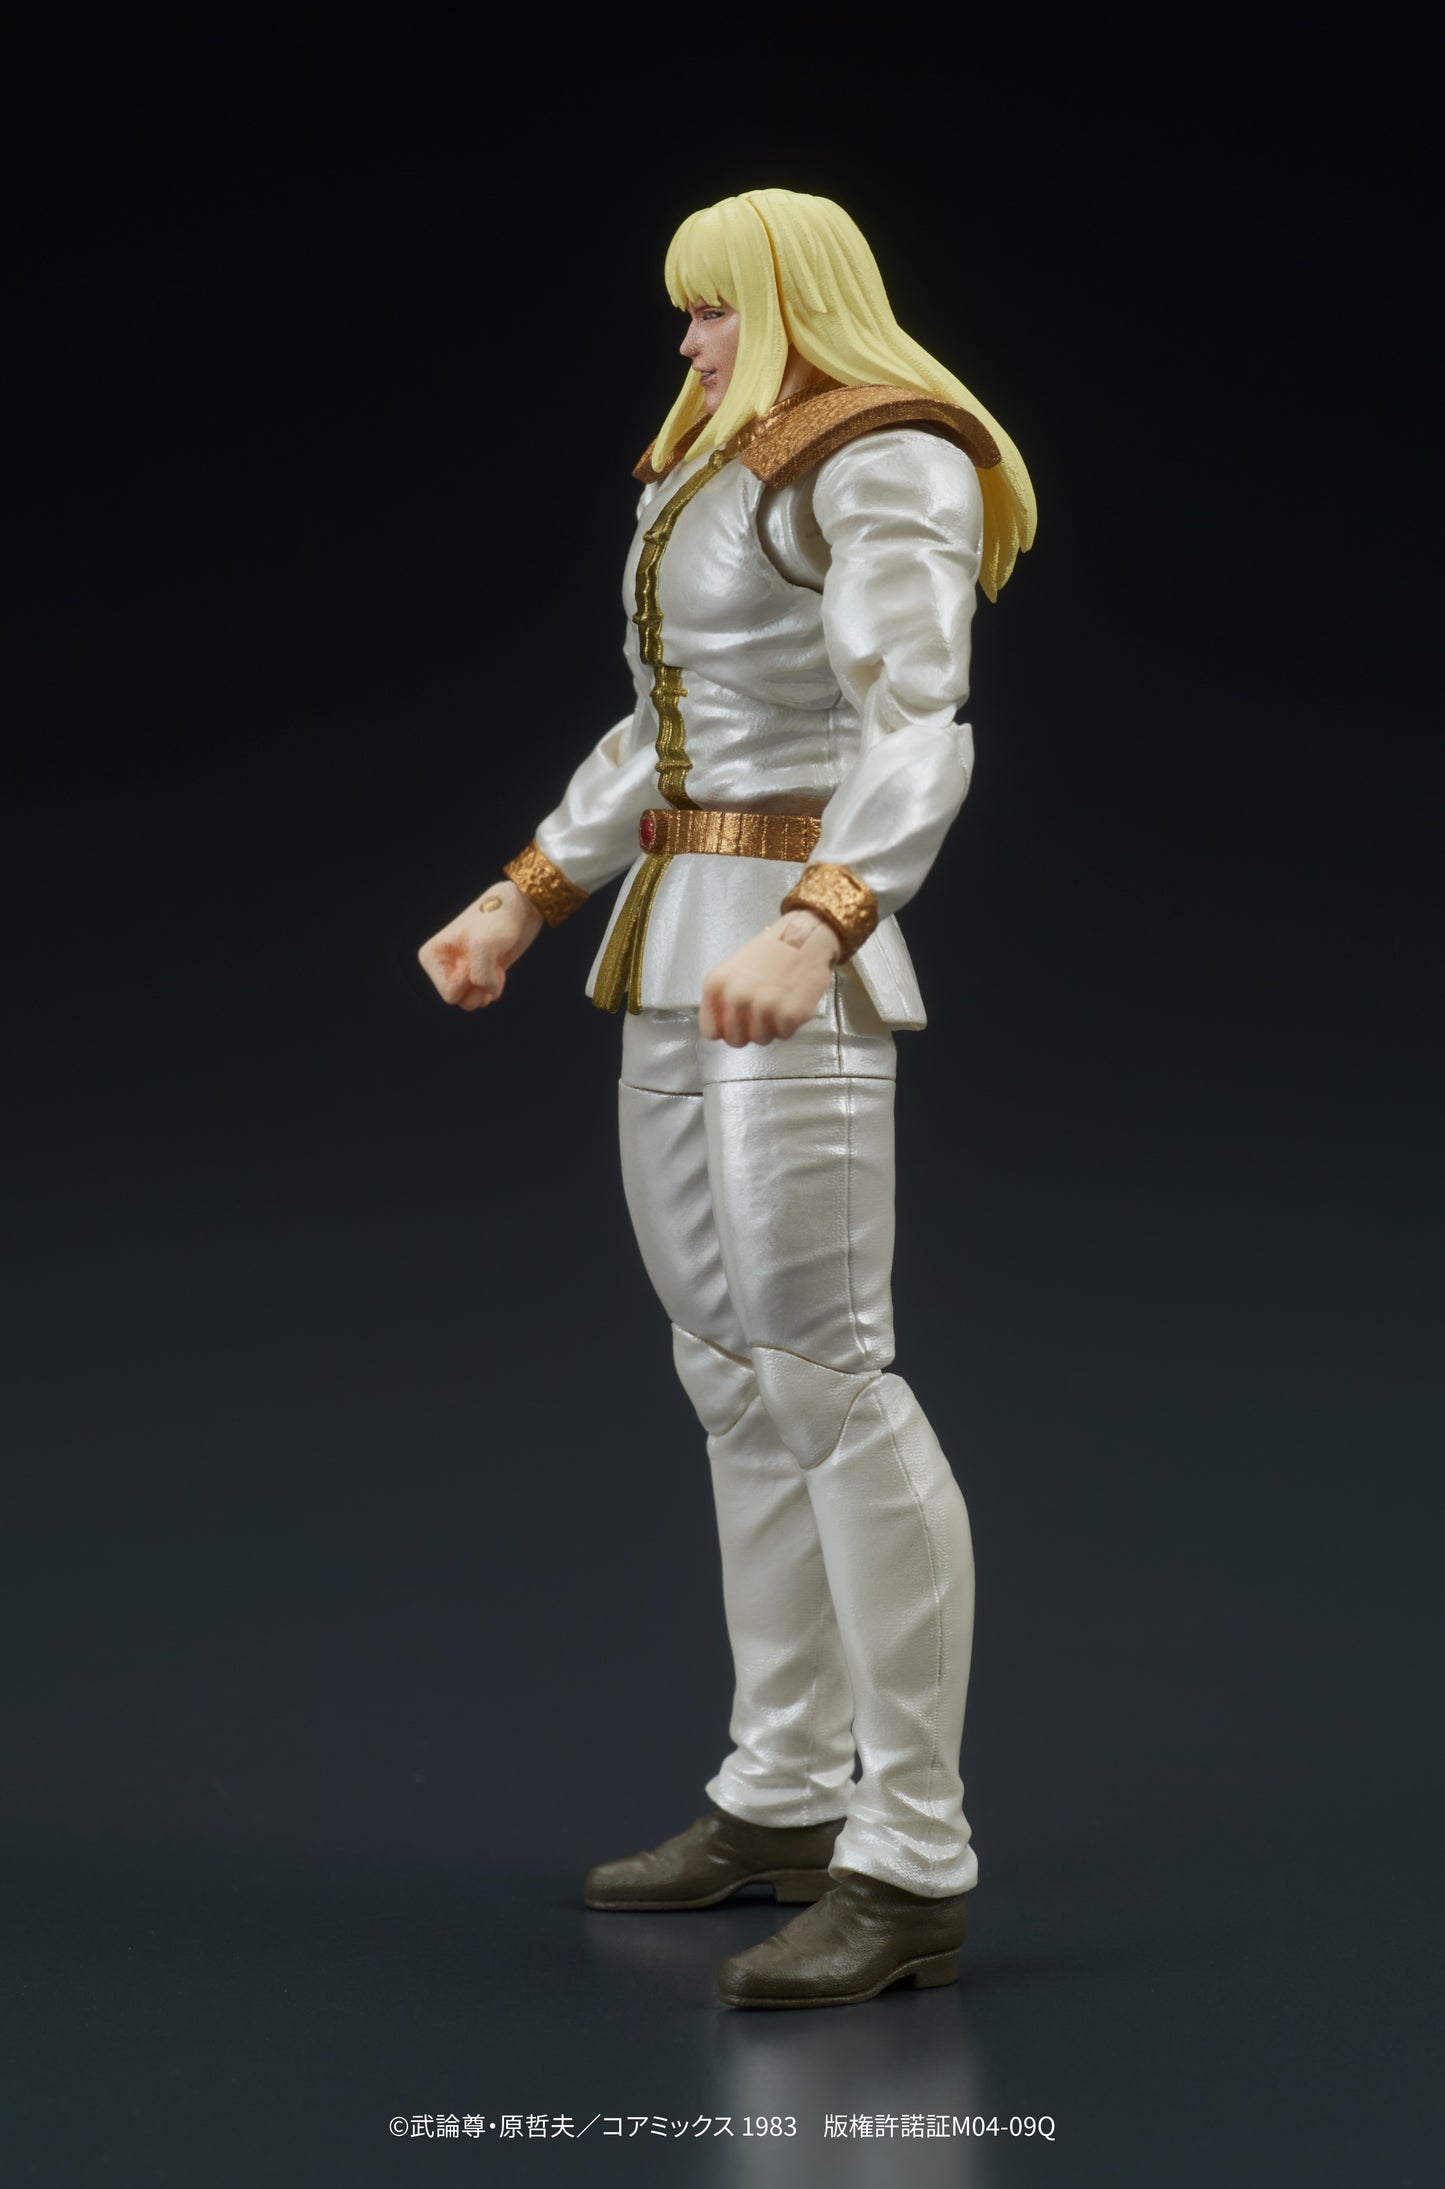 DIGACTION "Fist of the North Star" Shin & Heart Set, Action & Toy Figures, animota